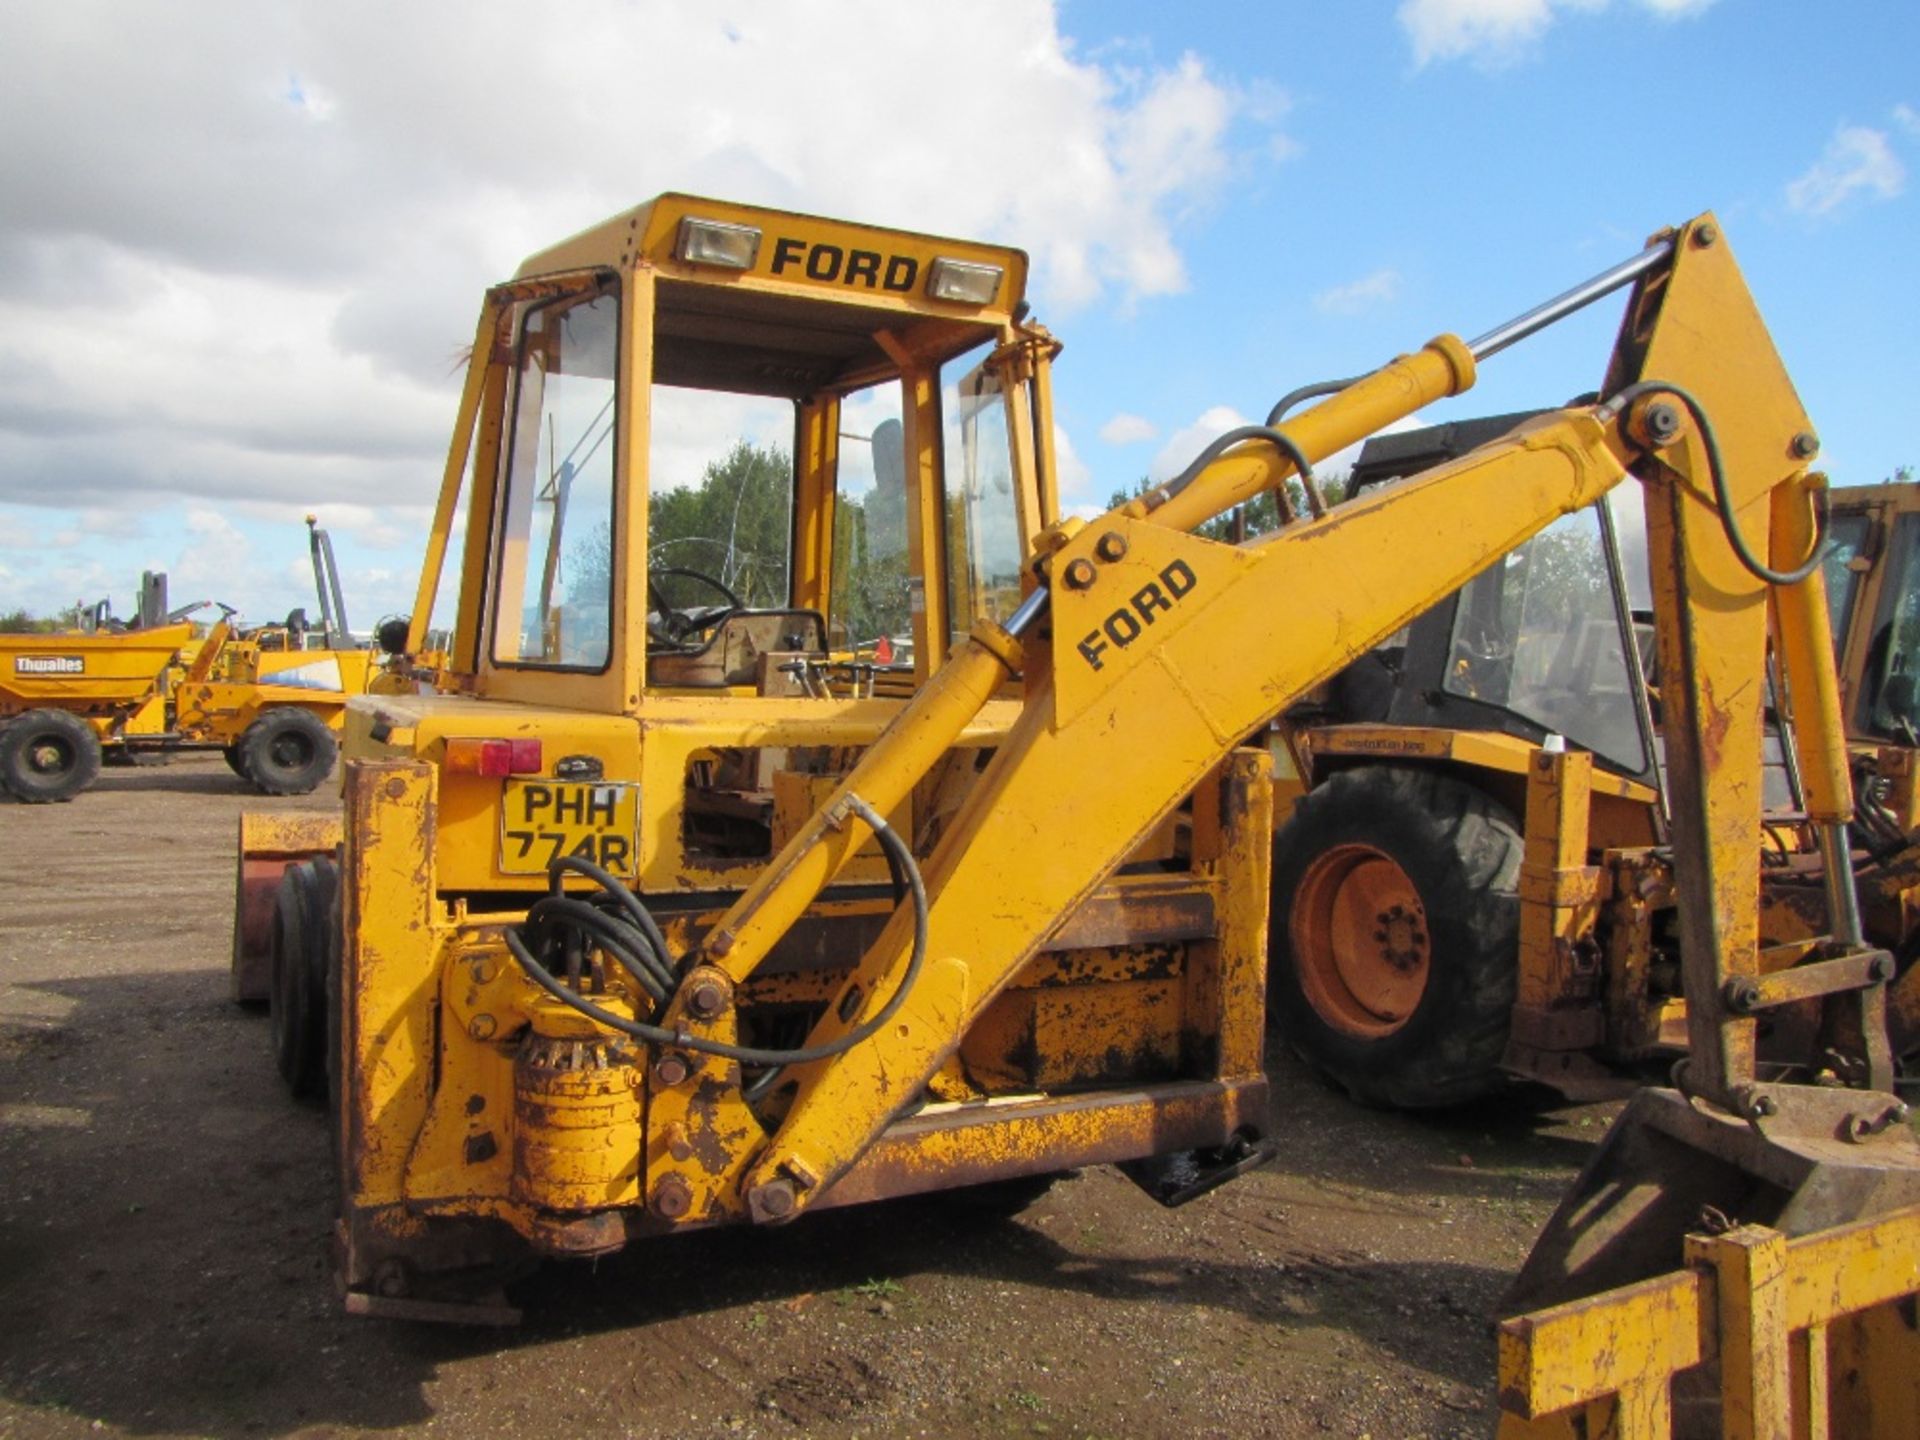 Ford 550 2wd Digger & 3 Buckets Reg. No. PHH 774R - Image 9 of 10